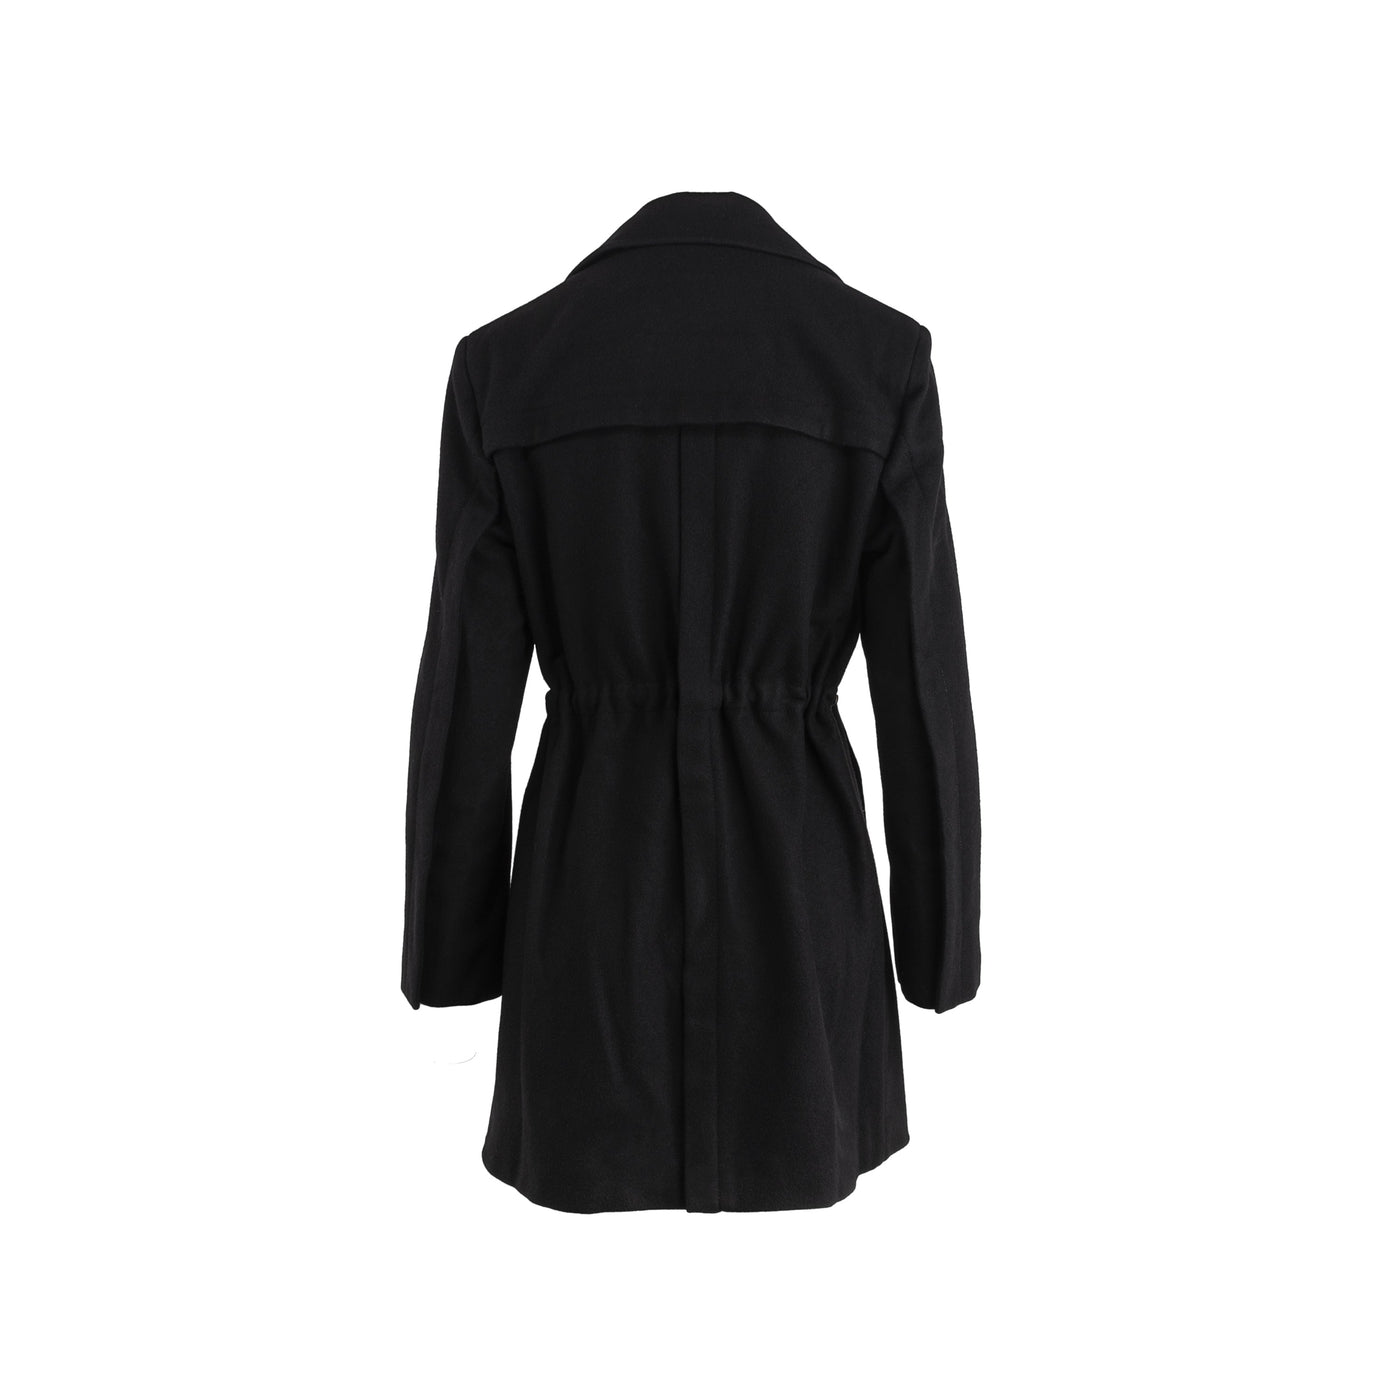 Ann Demeullemeester black wool coat. Long fit with maxi lapels, two front pockets and drawstring closure pre-owned